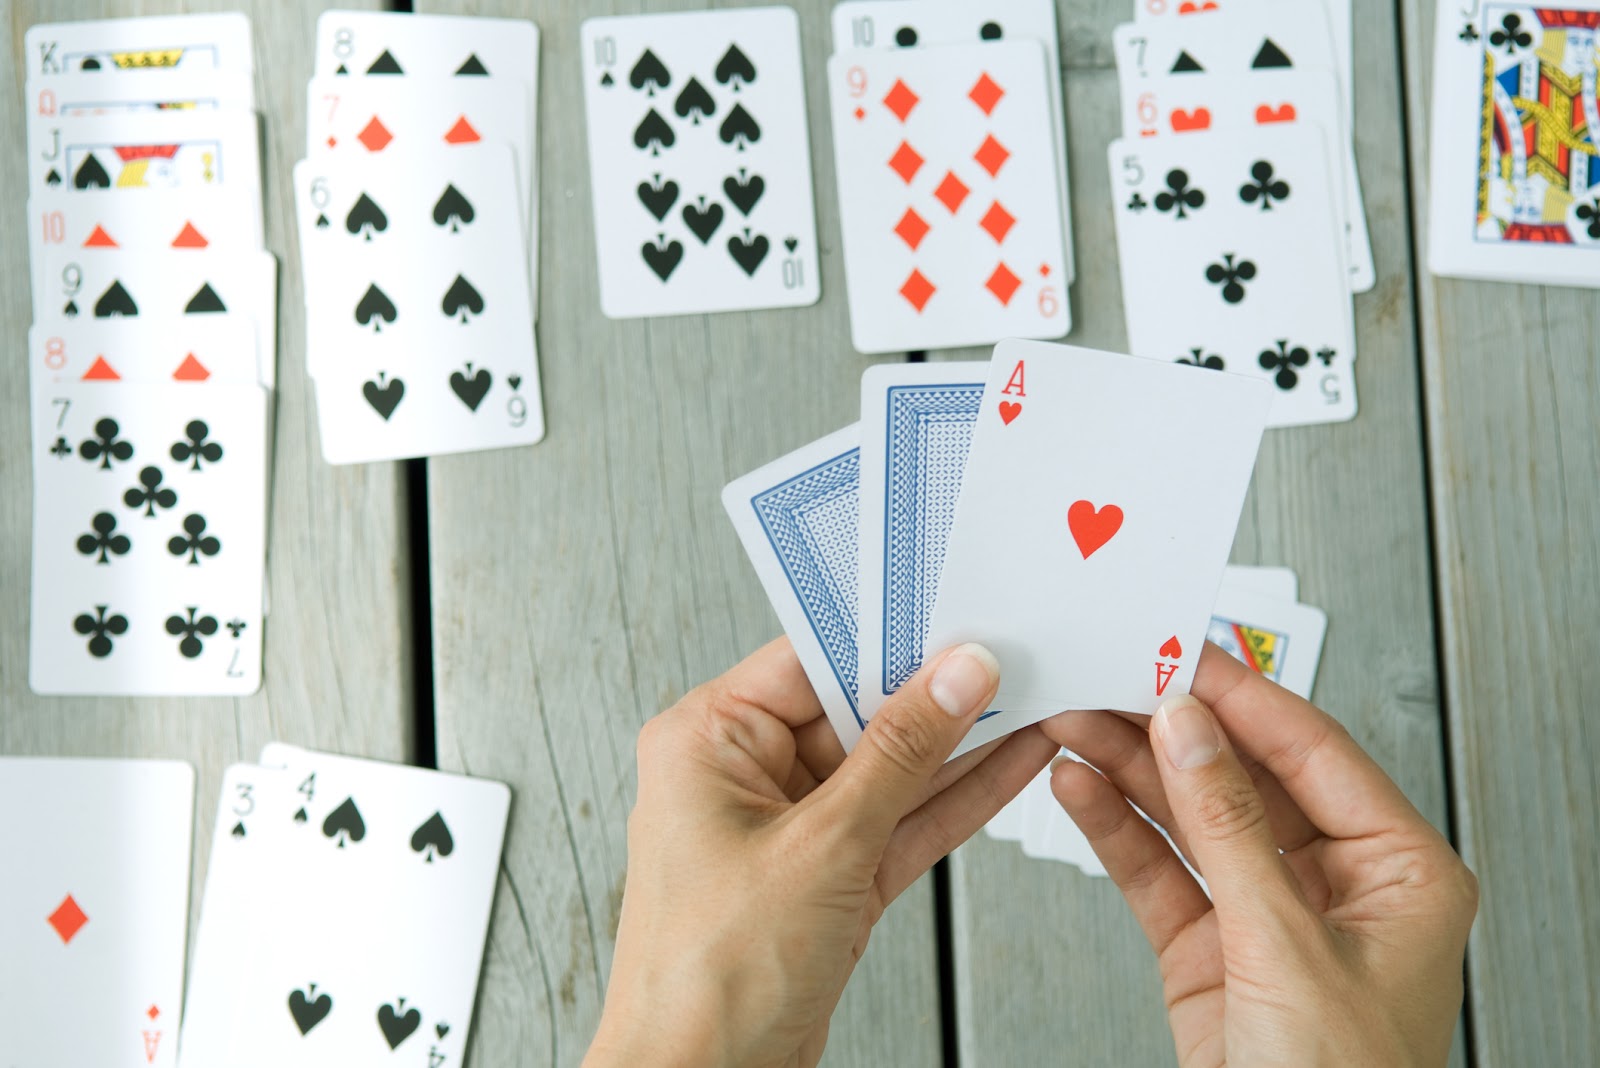 6 Fun Card Games to Play Alone & Engage Your Mind | LoveToKnow